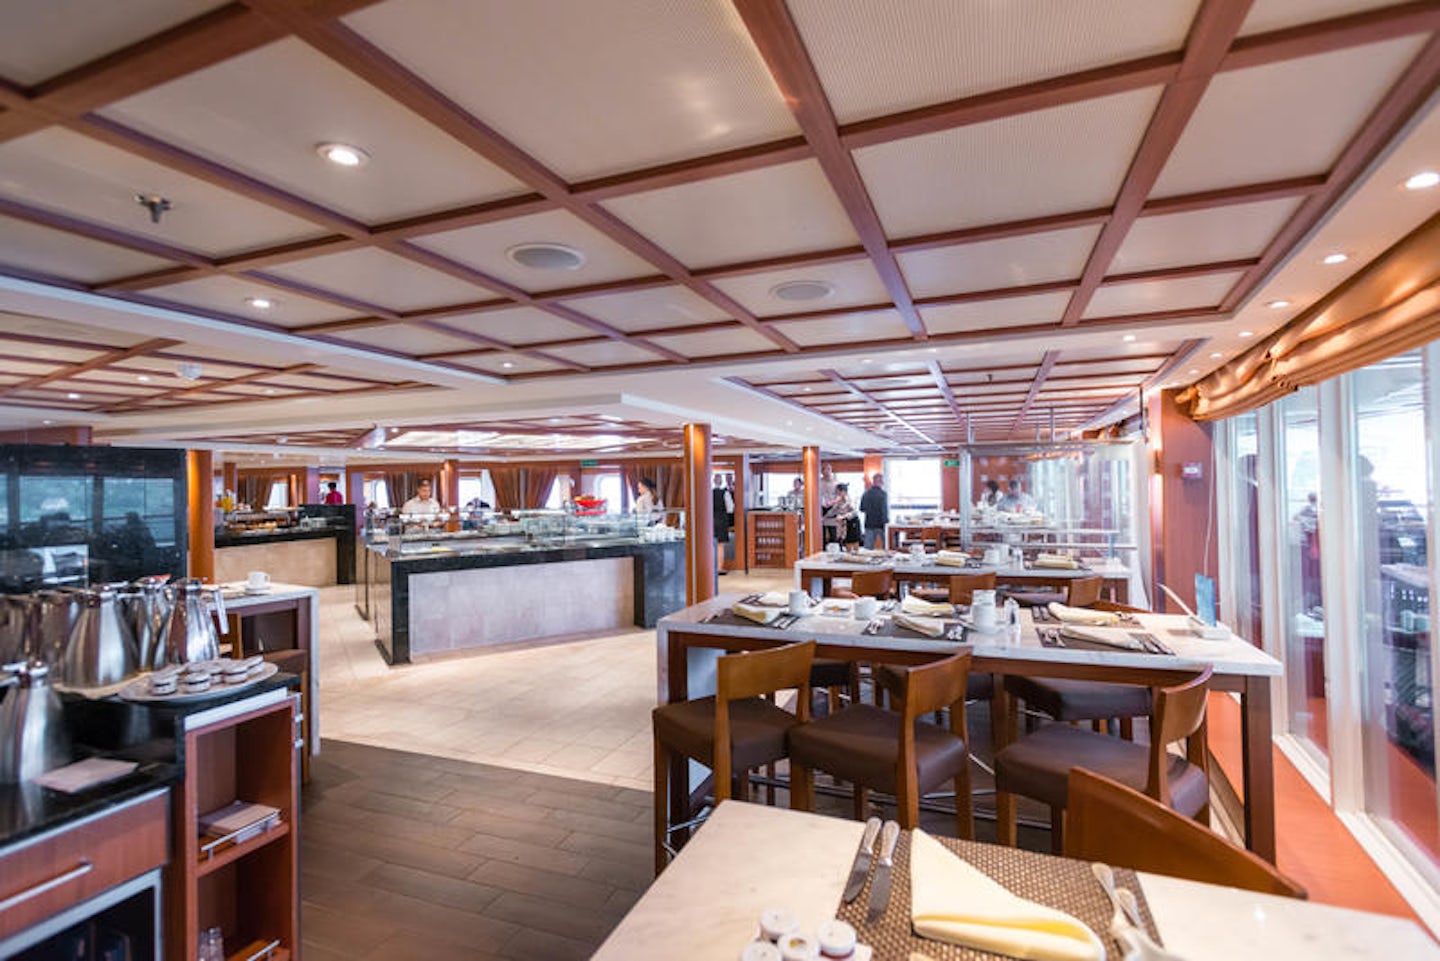 The Colonnade Restaurant on Seabourn Quest